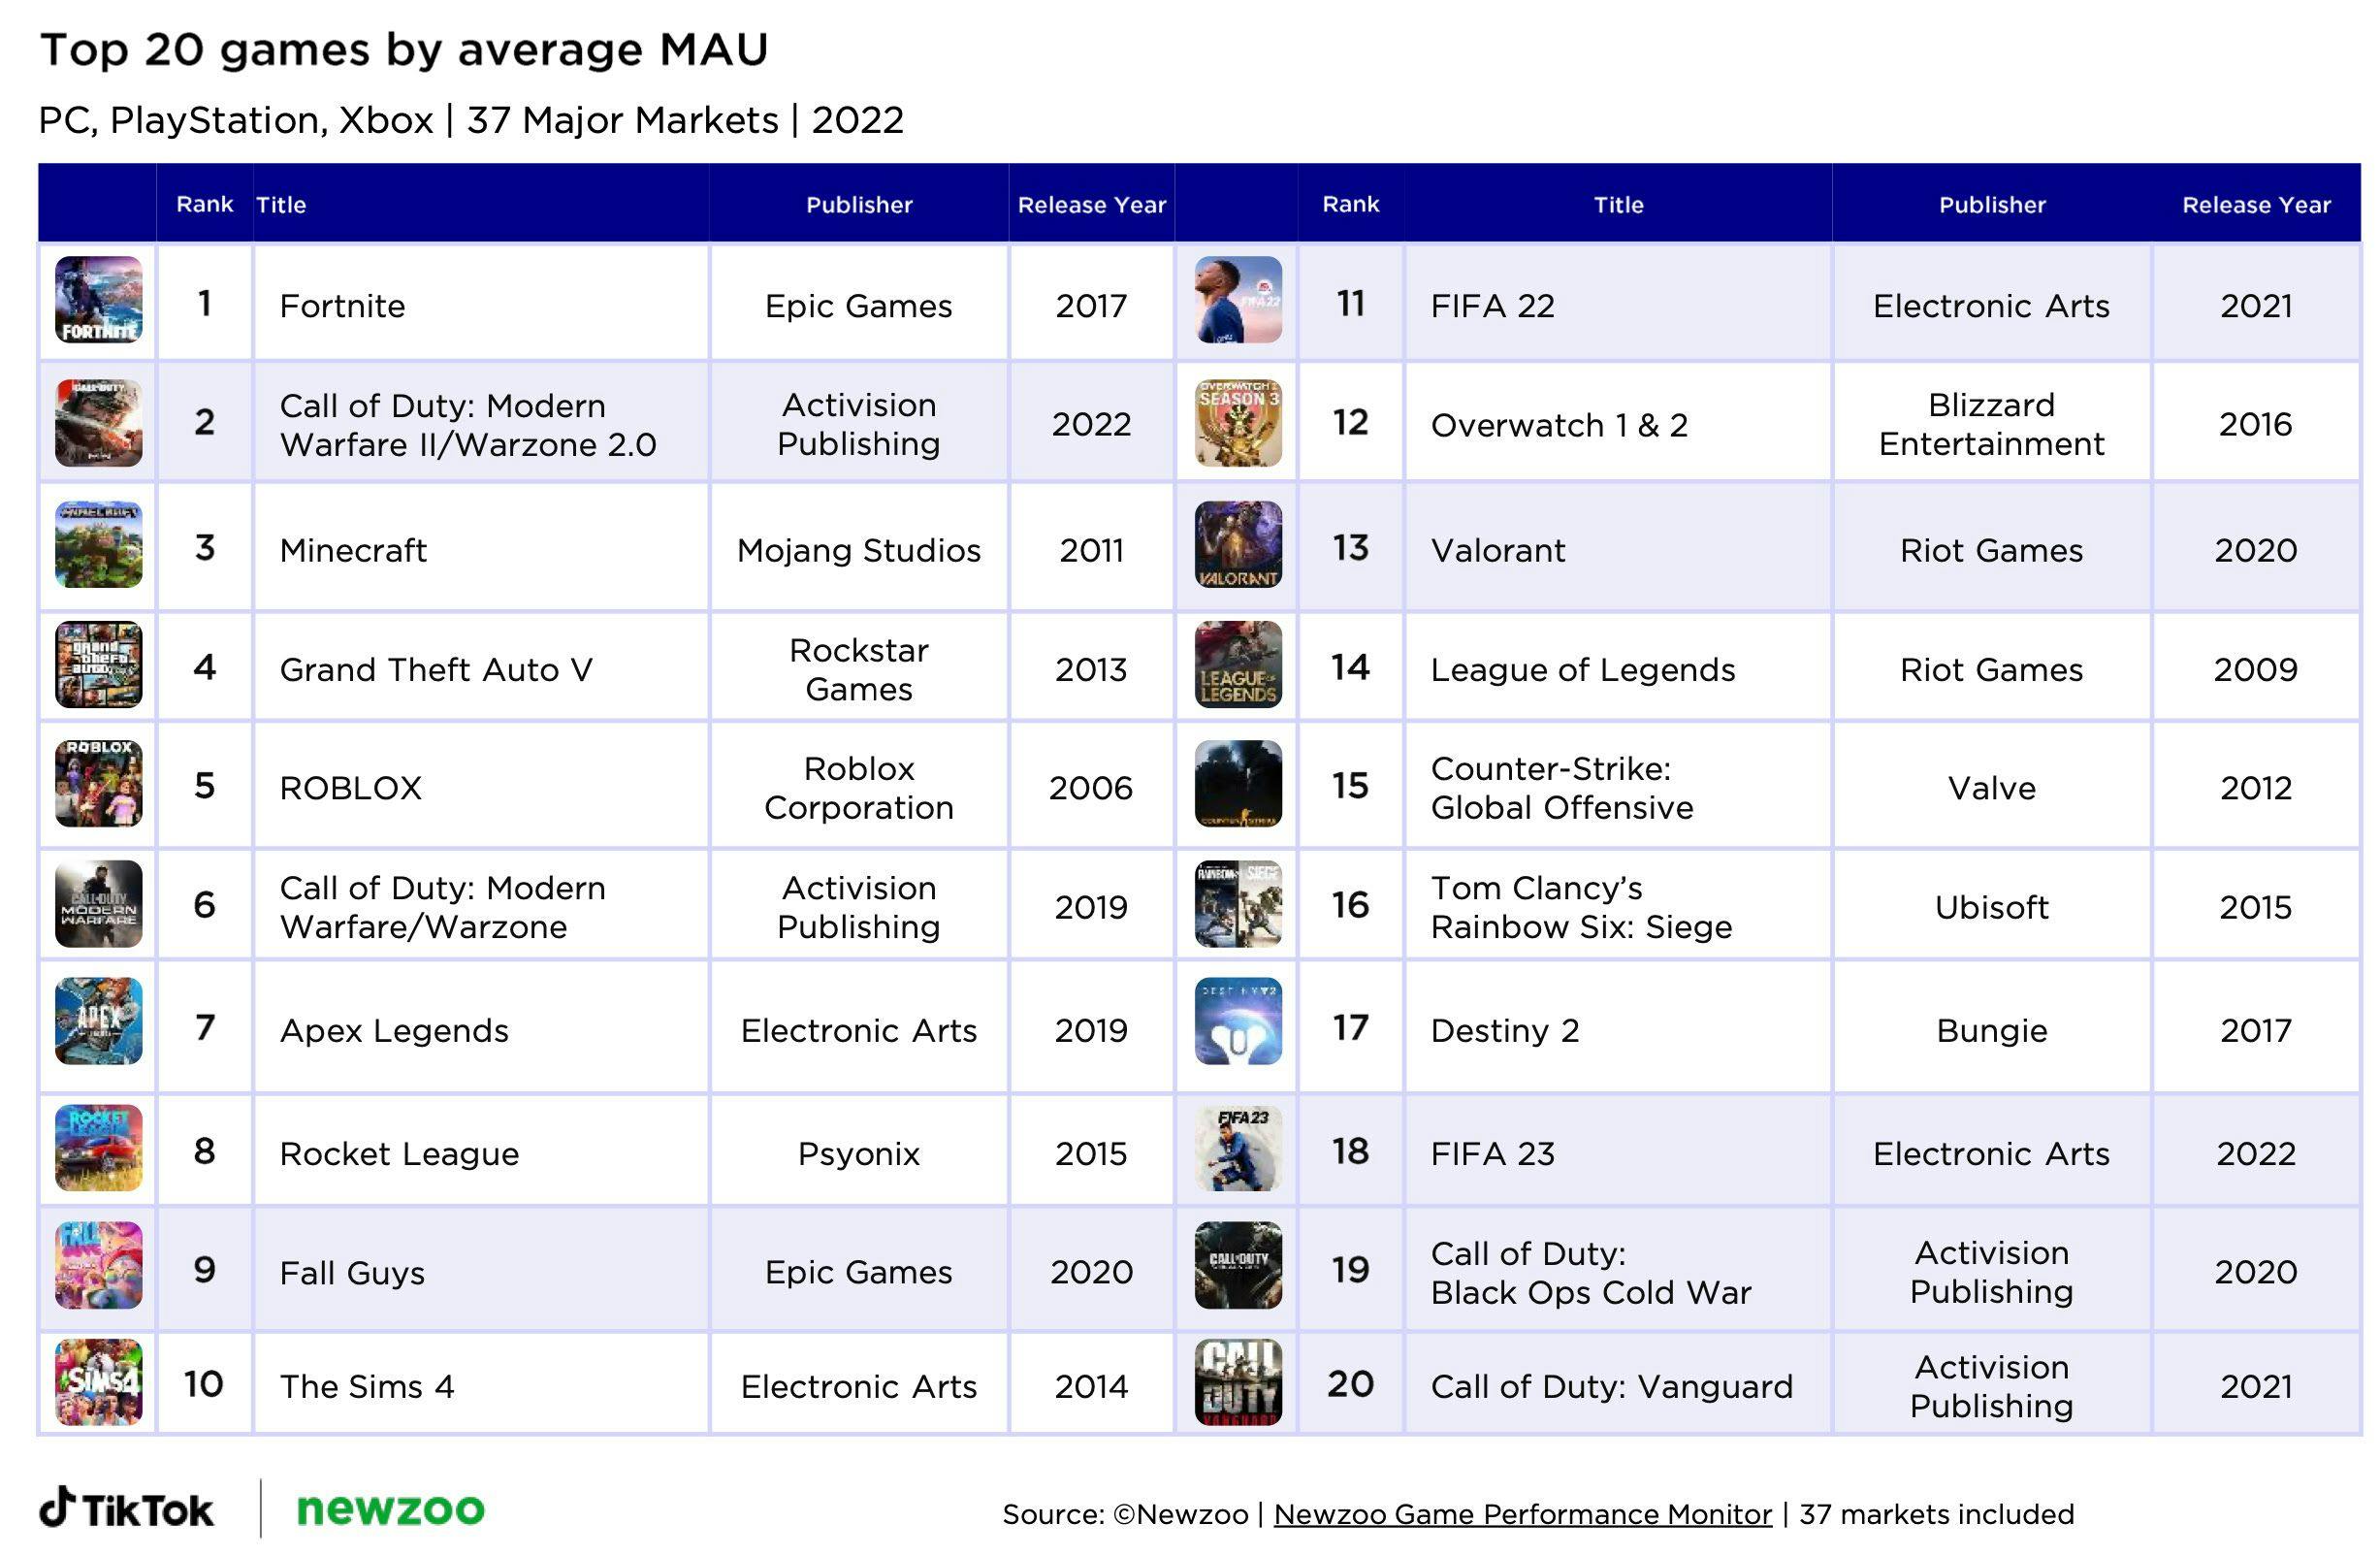 Top Xbox games by monthly active users (MAU) - 37 markets